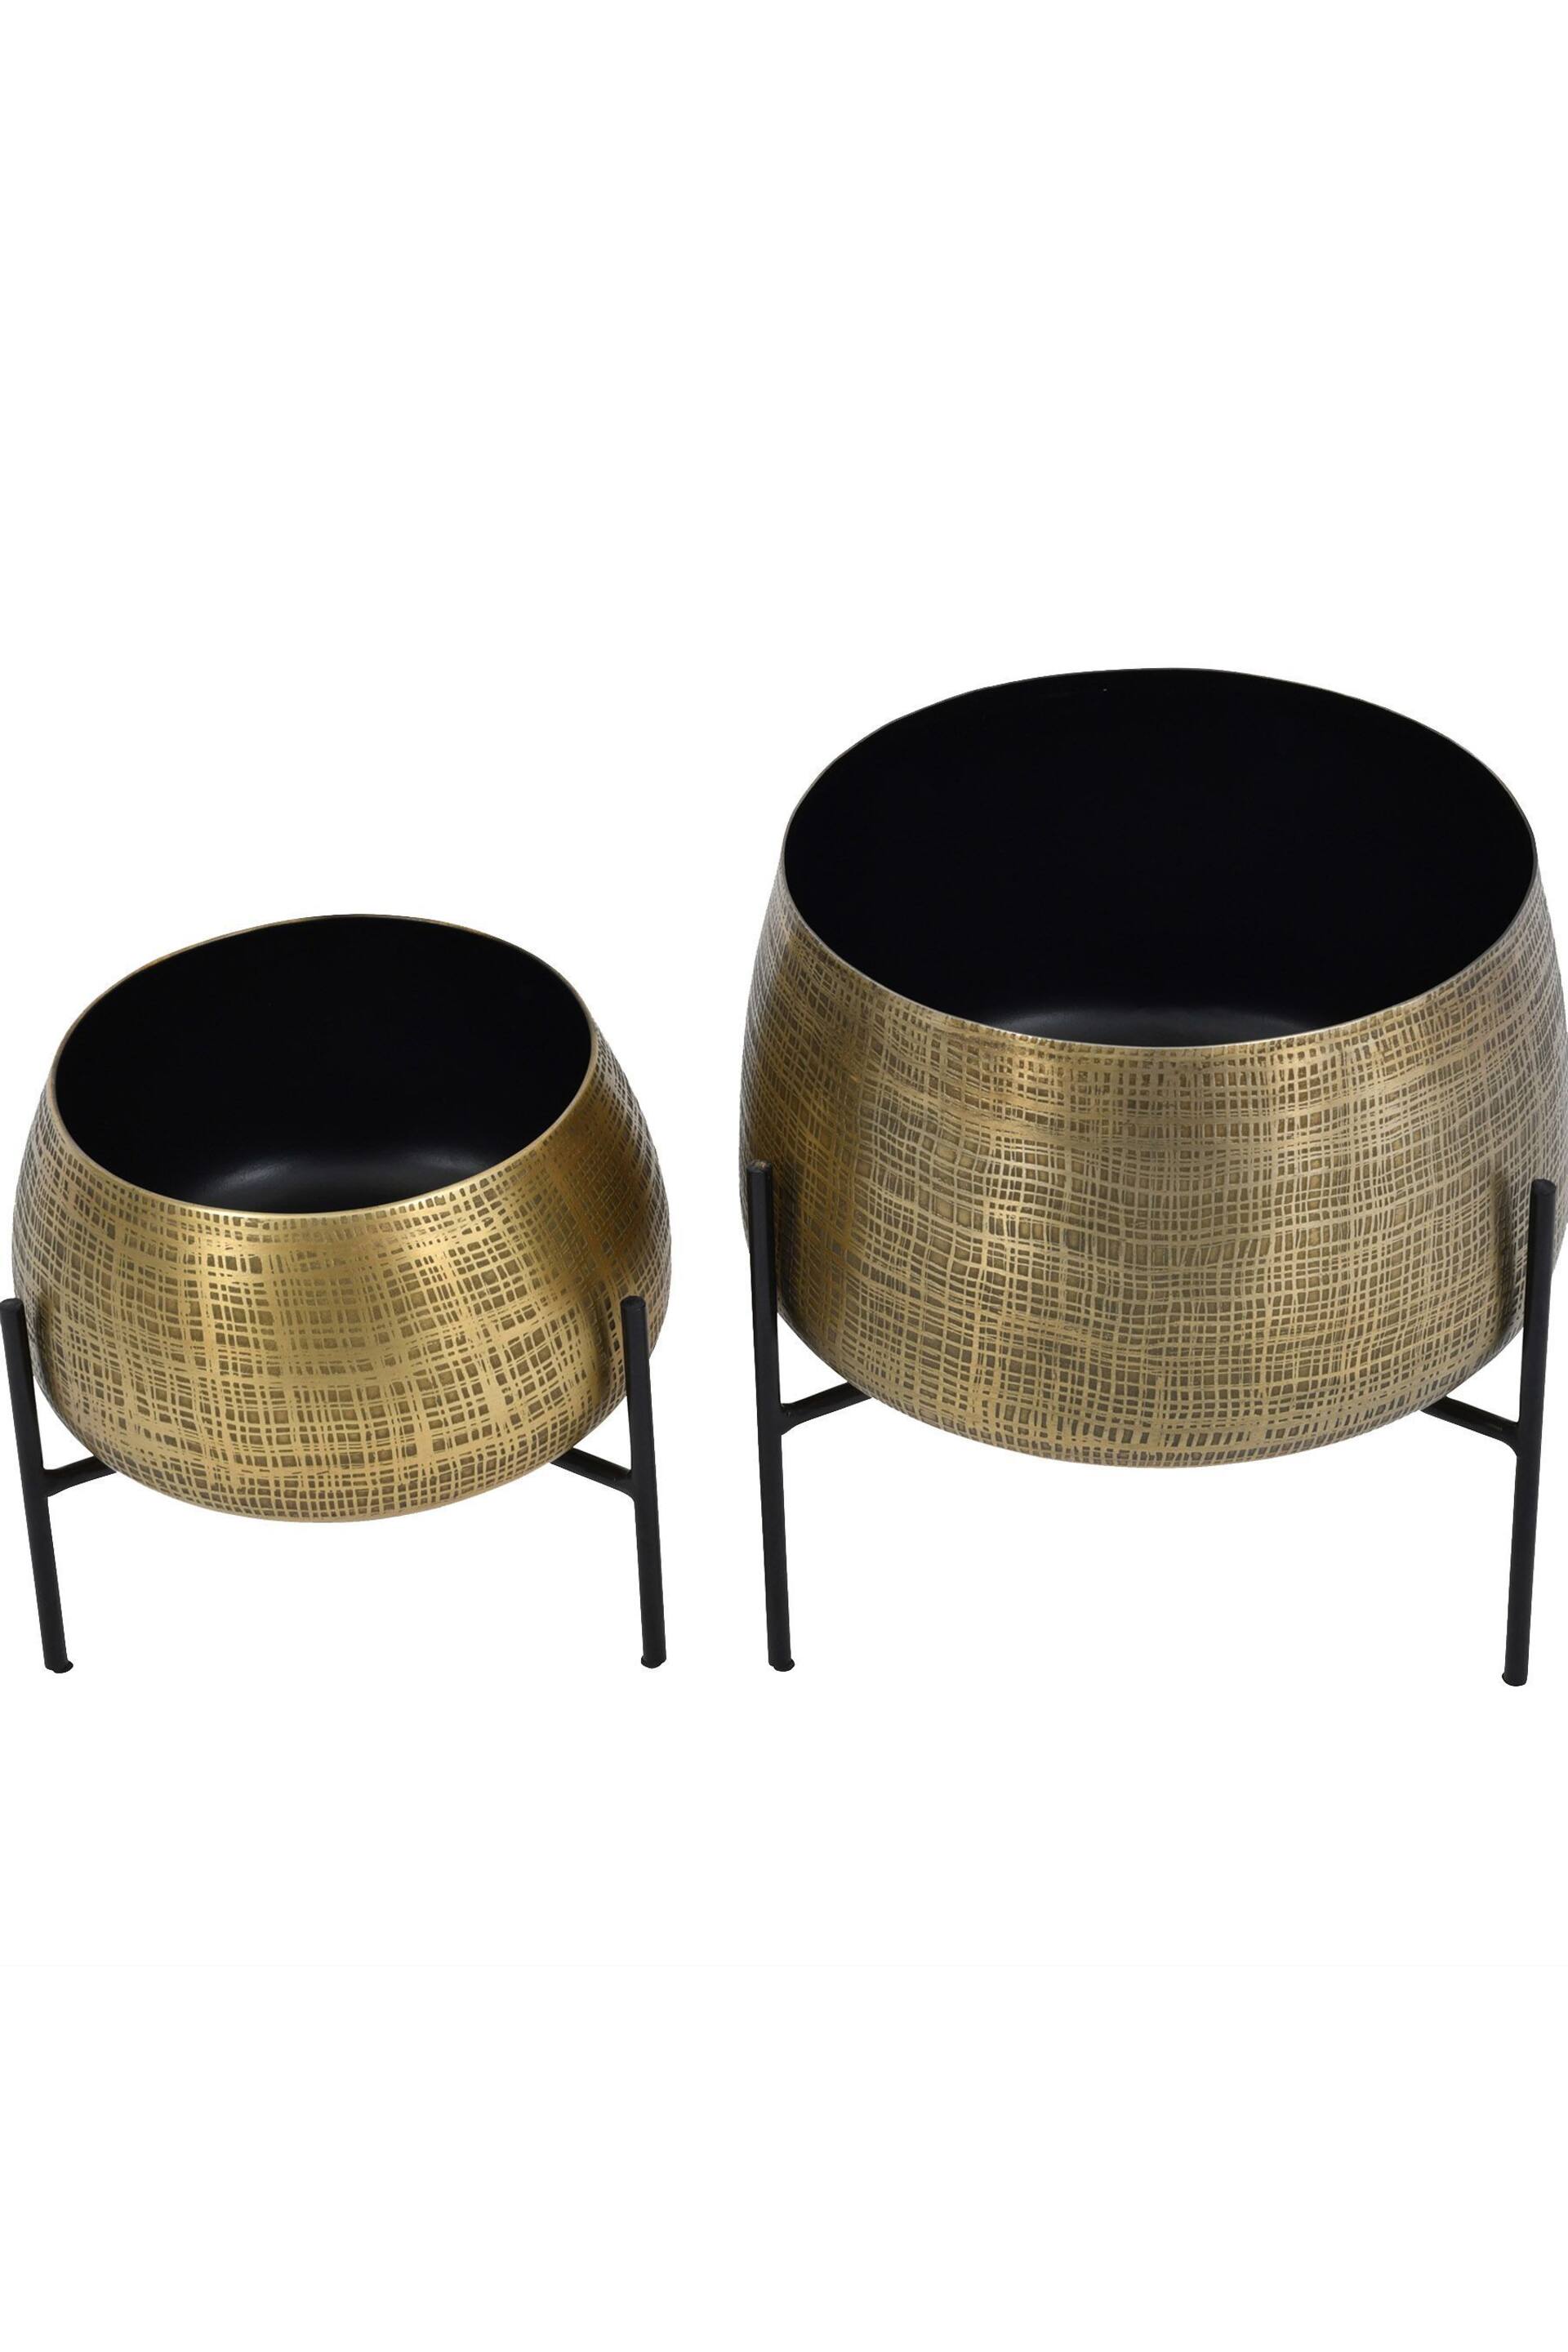 Libra Brass Clyde Tabletop Brass Set of 2 Planters on Black Stands - Image 3 of 4